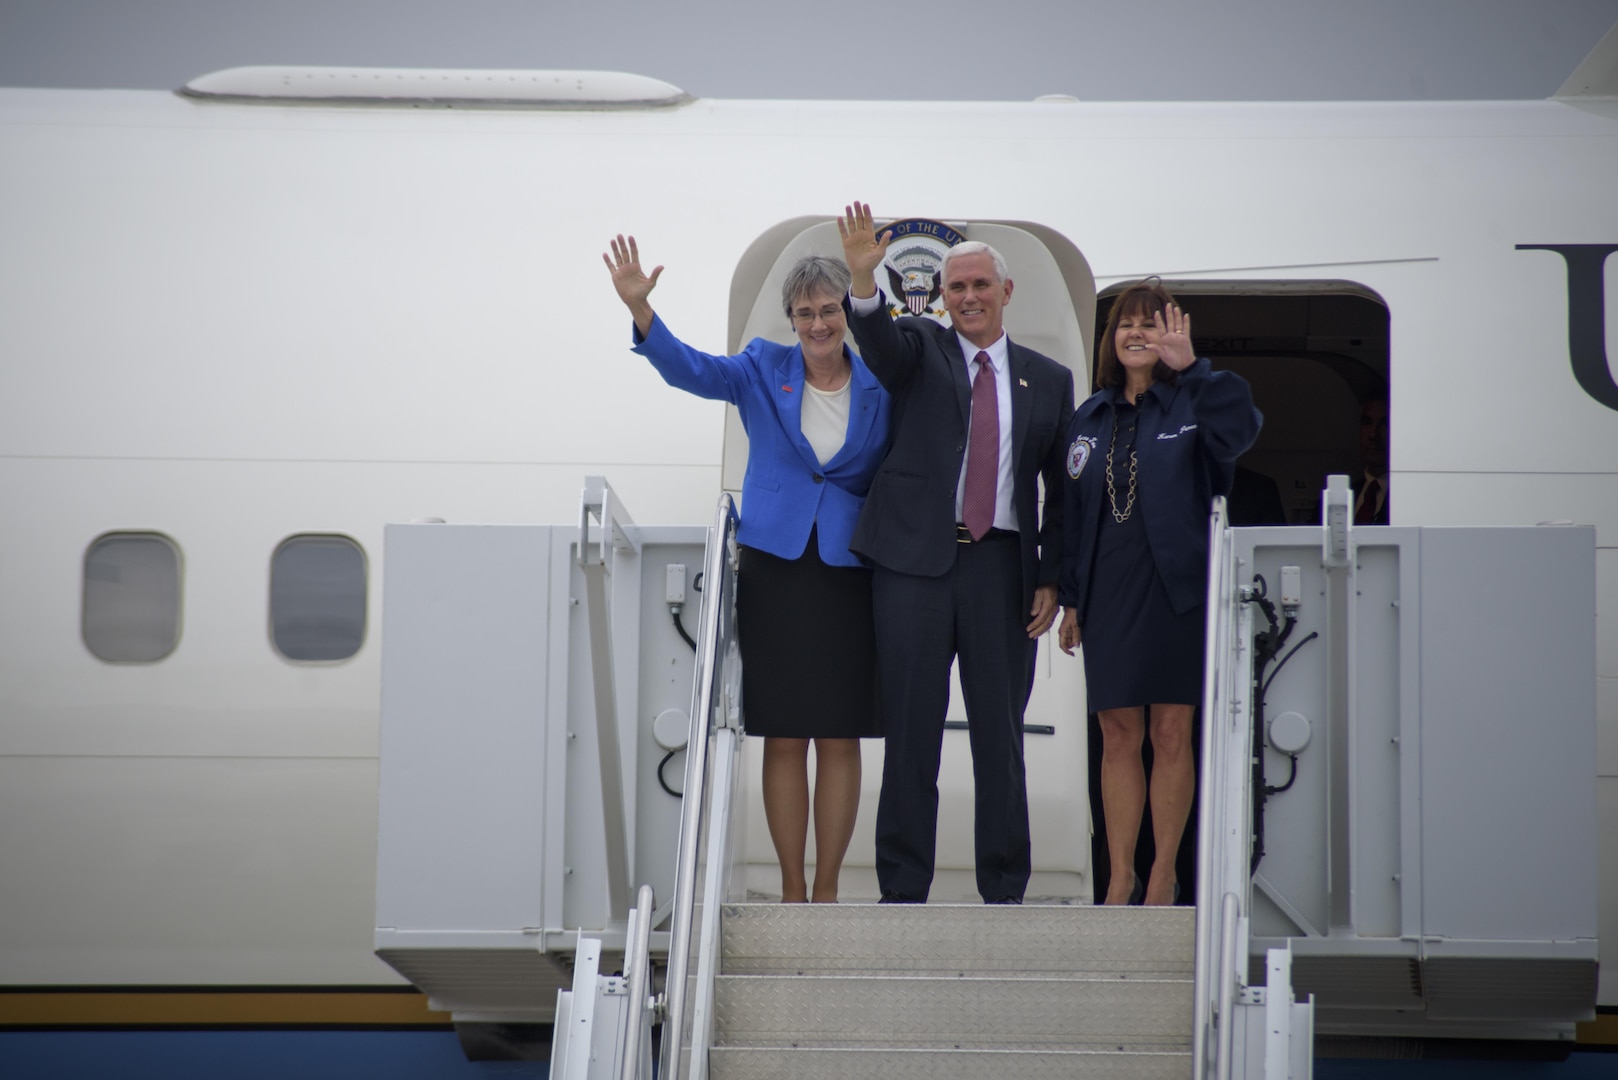 PETERSON AIR FORCE BASE, Colo. - Vice President Mike Pence alongside his
wife, Karen, and Secretary of the Air Force Heather Wilson land at Peterson
Air Force Base, Colo., June 23, 2017. Pence and Wilson visited Peterson AFB,
Schriever AFB and Cheyenne Mountain Air Force Station for a closer look at
how space plays an integral role in military operations. (U.S. Air Force
photo by Senior Airman Dennis Hoffman)